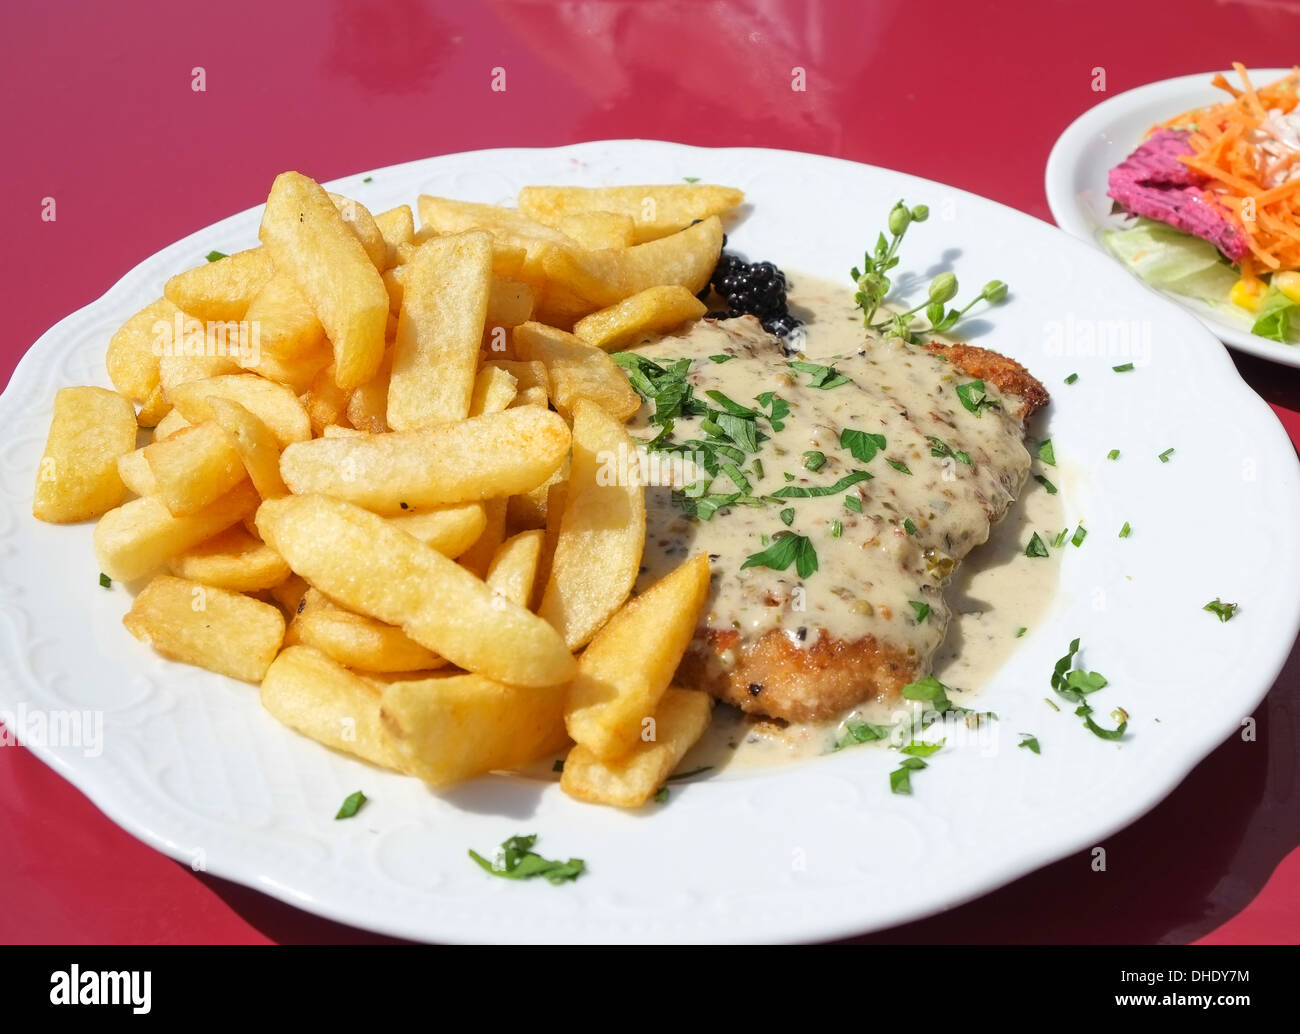 A schnitzel with a pepper sauce, served with fries and a side salad Stock Photo